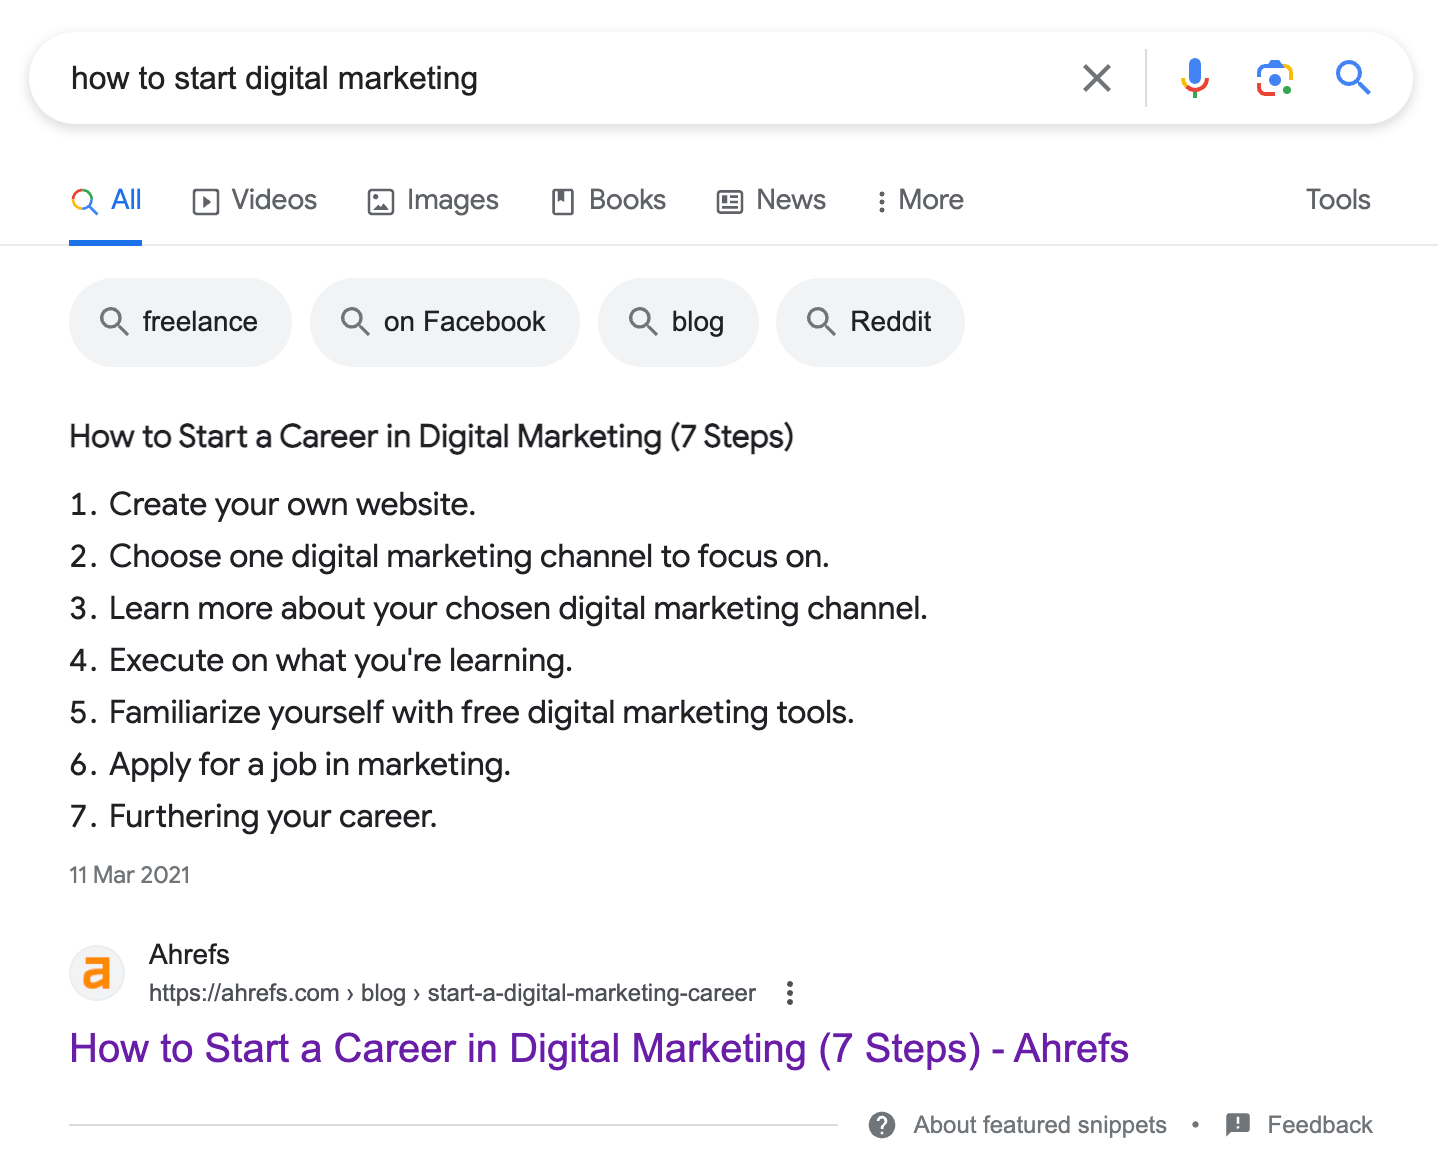 The featured snippet for the query "how to start digital marketing"